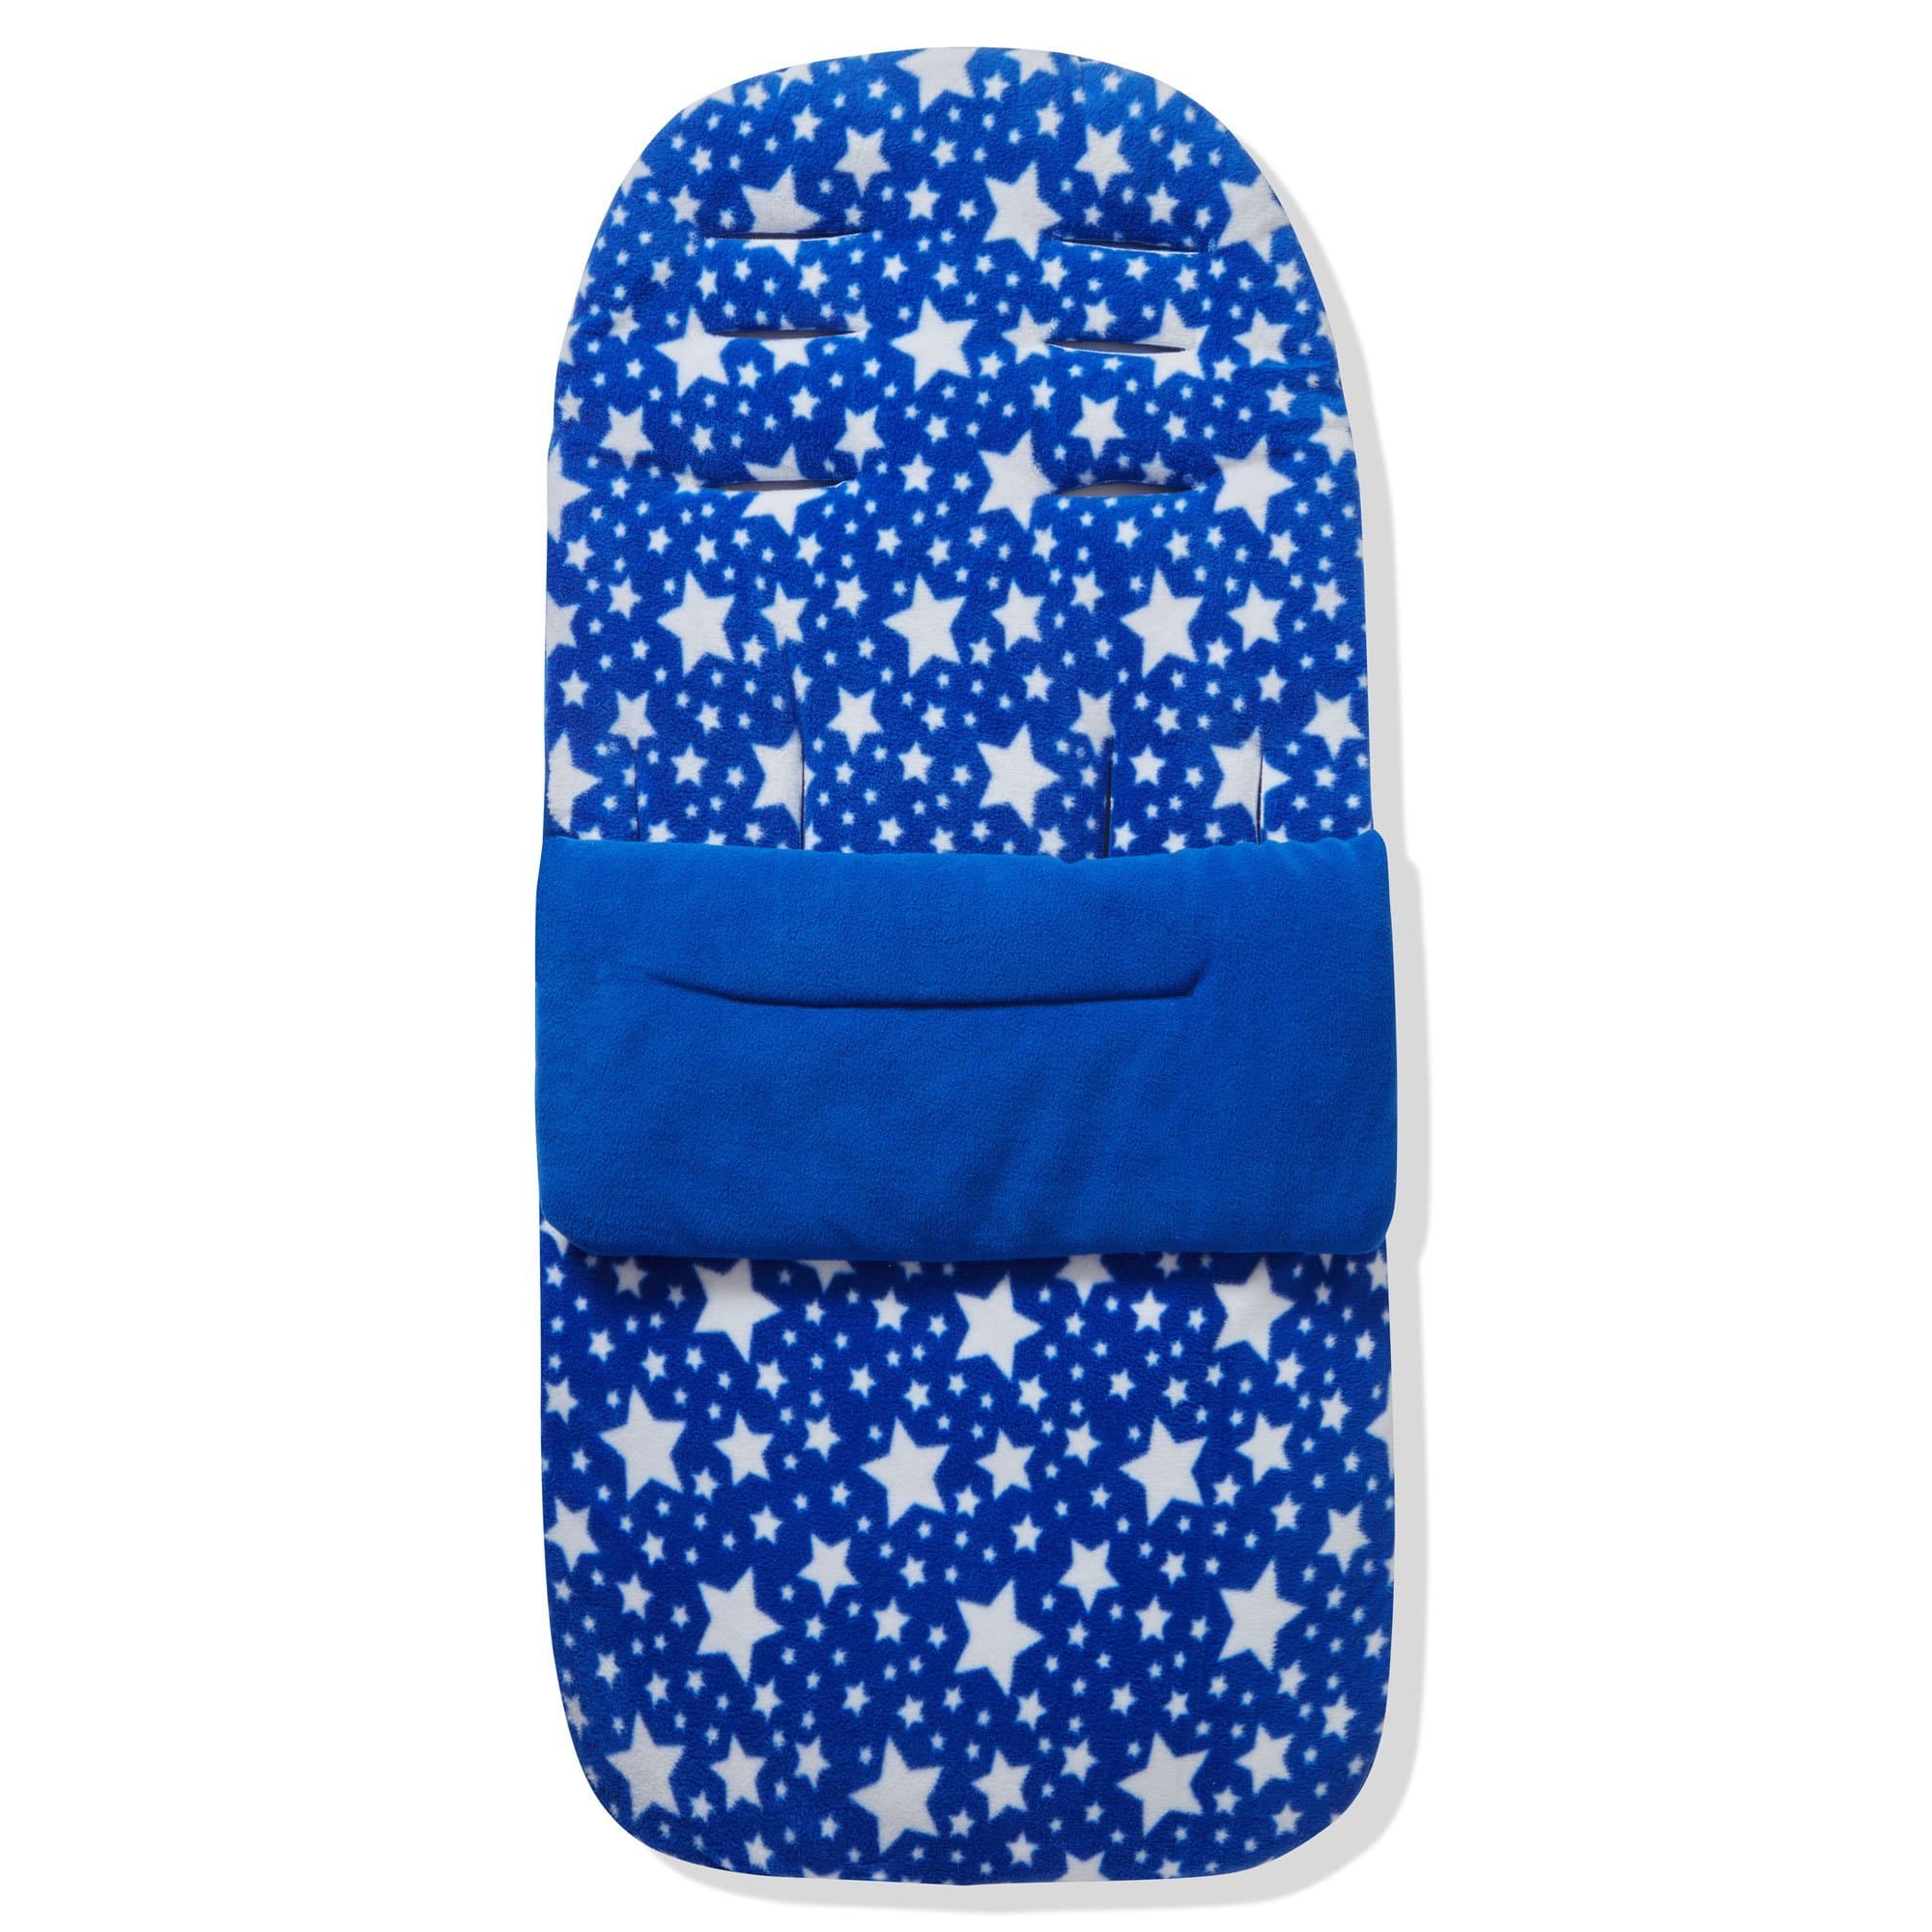 Fleece Footmuff / Cosy Toes Compatible with Mothercare - Blue Star / Fits All Models | For Your Little One